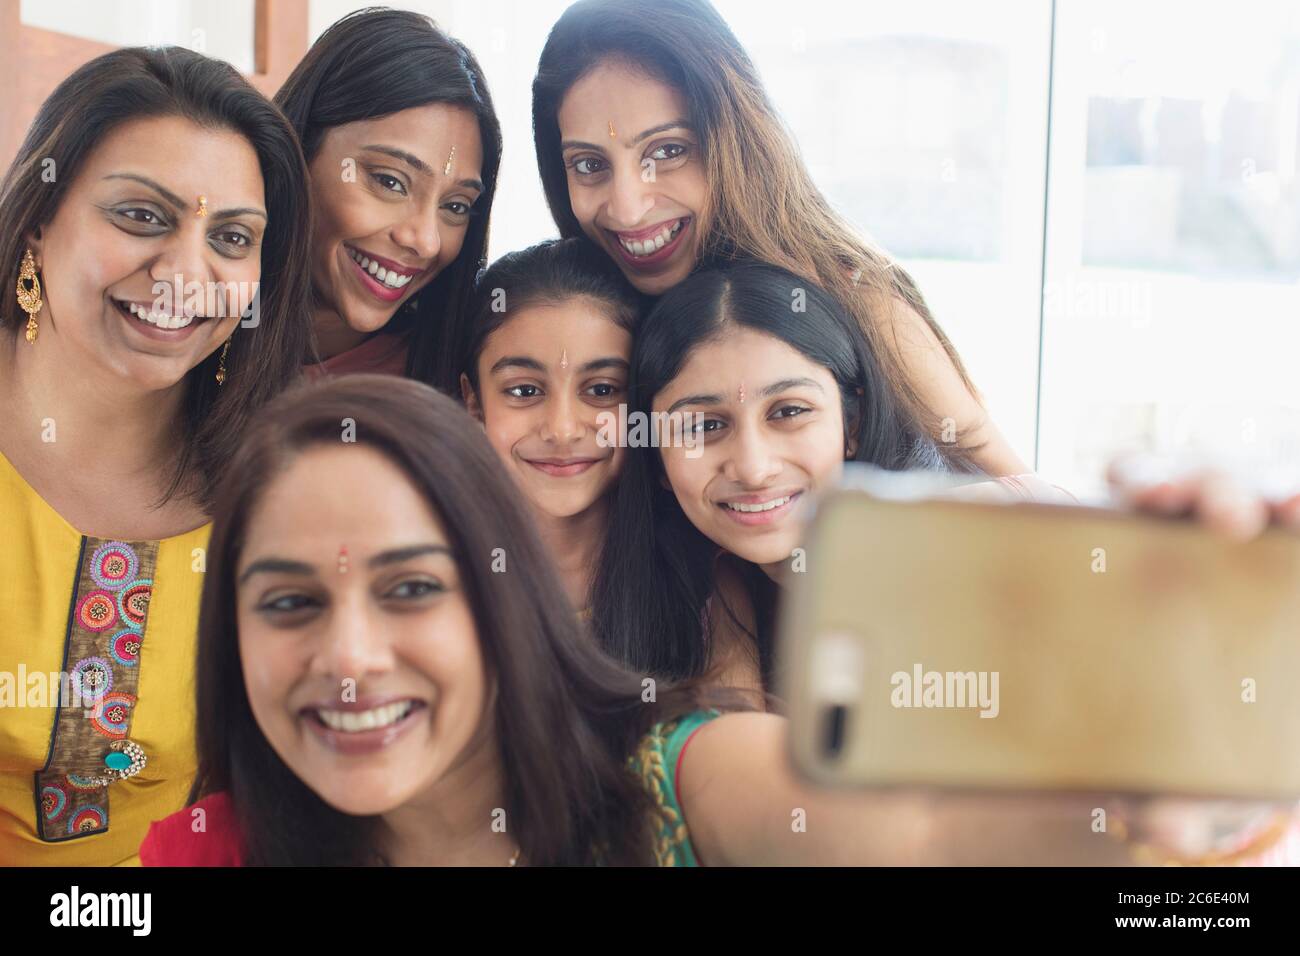 Happy Indian women and girls with binds taking selfie Stock Photo